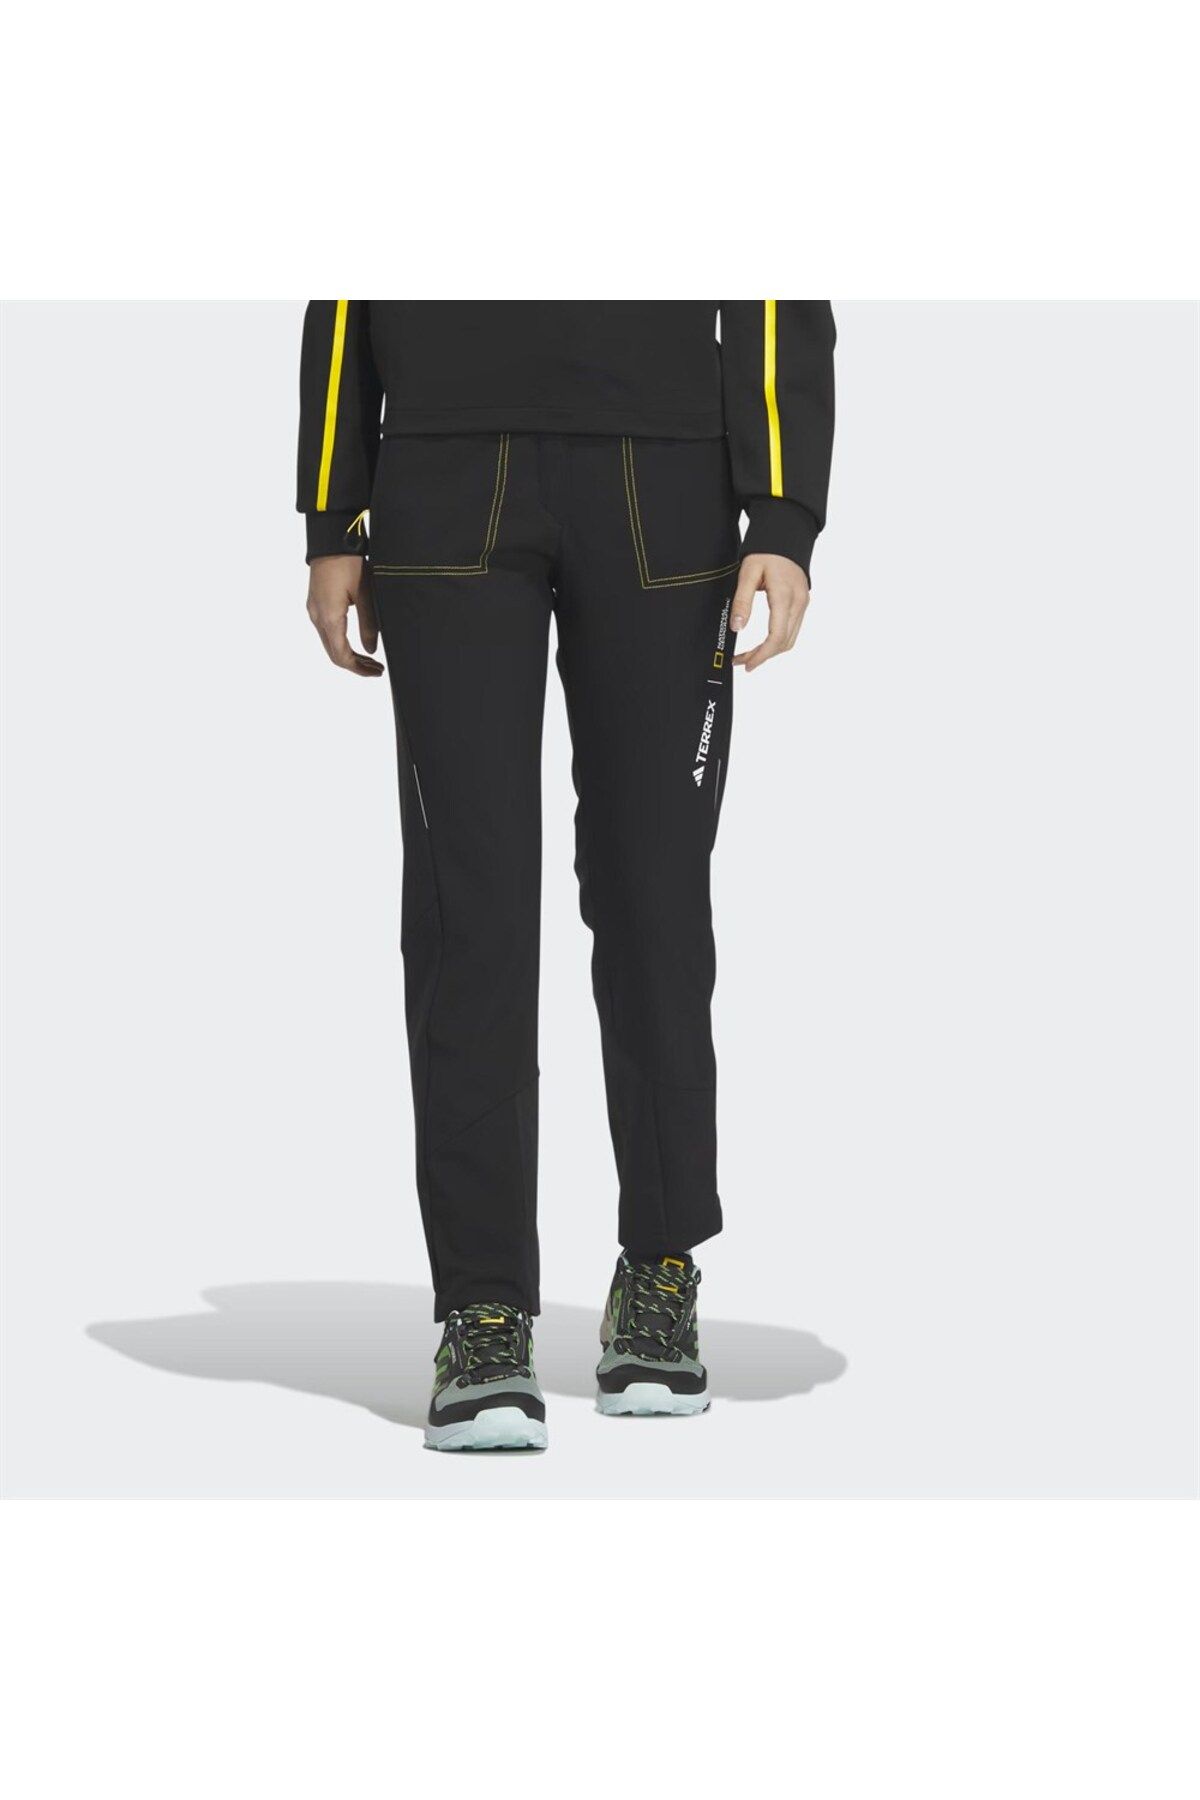 adidas Terrex National Geographic Soft Shell Women's Trousers - Trendyol